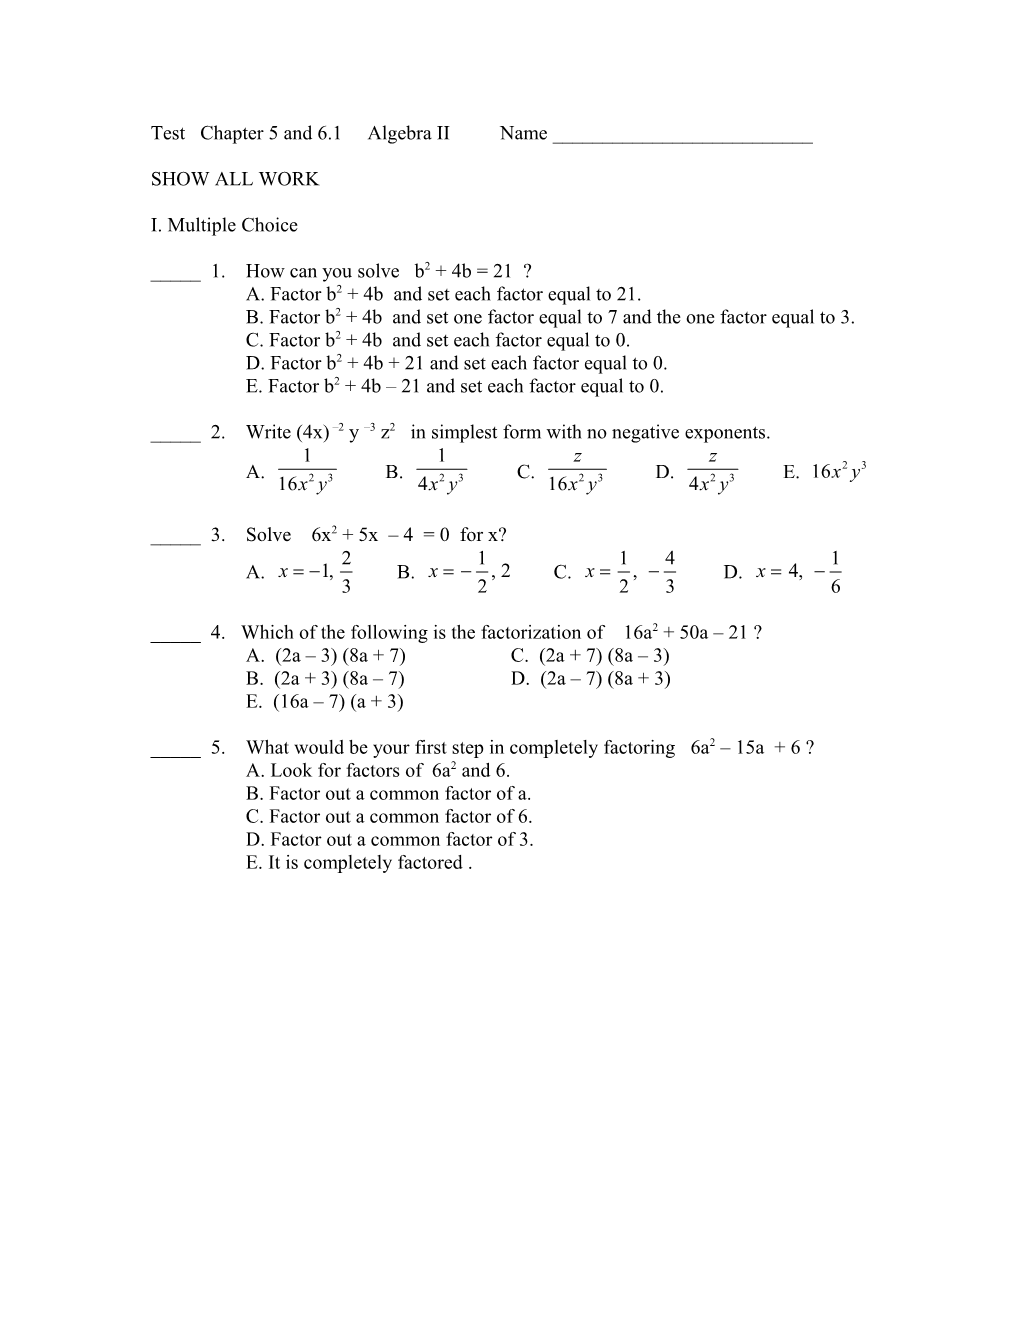 Test Factoring Sections 5